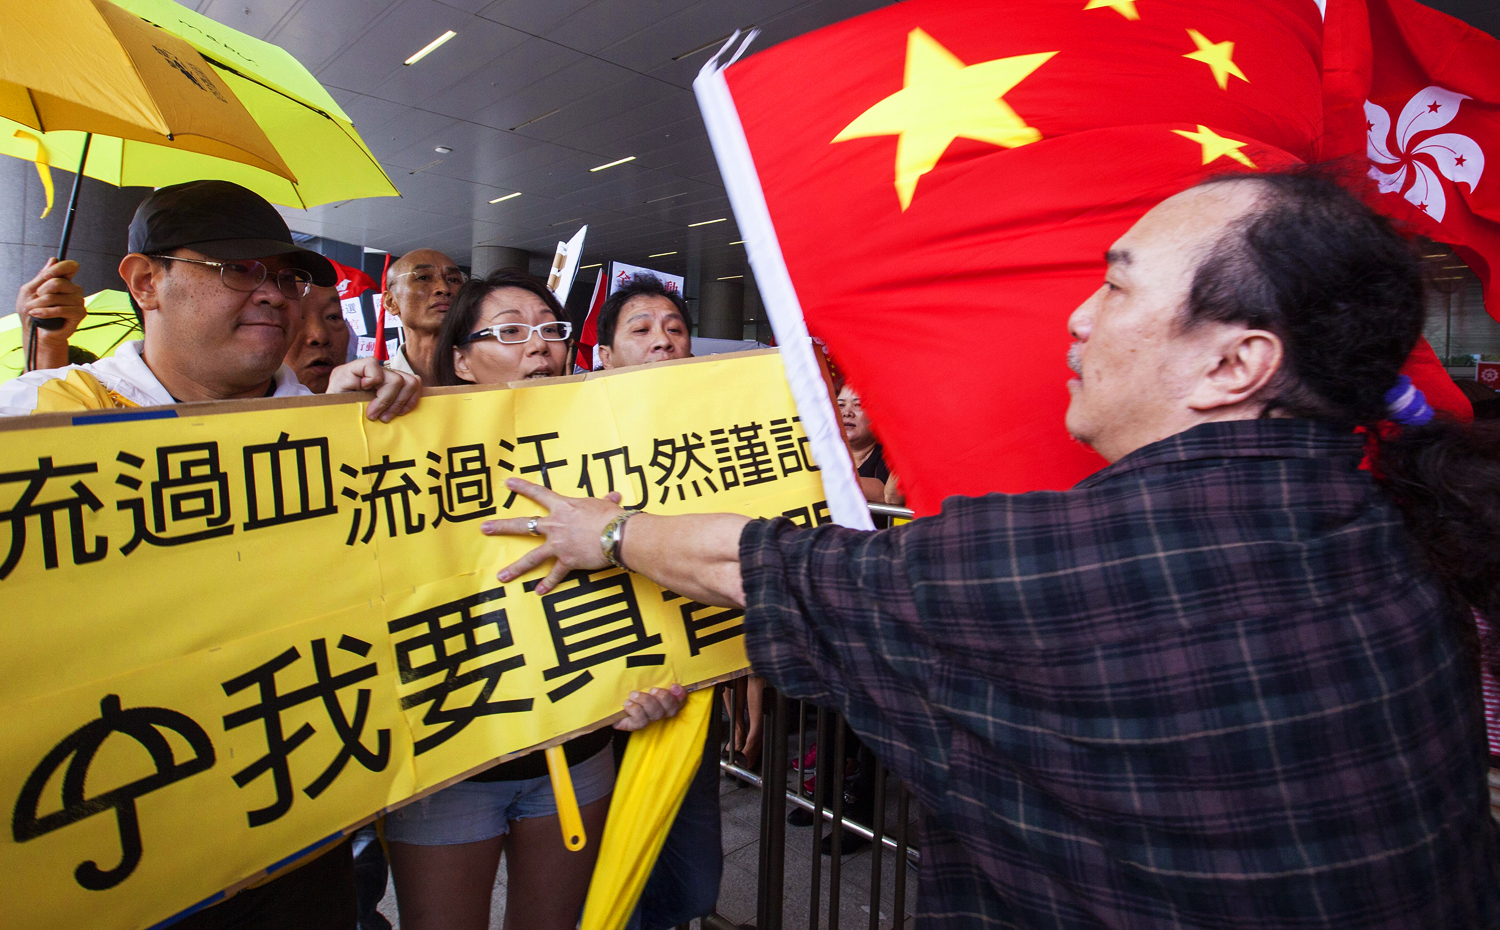 Supporters of the Hong Kong government's political reform package waving Chinese national and Hong Kong regional flags scuffle and exchange verbal abuse with protesters waving yellow umbrellas and banners opposing the Hong Kong government's proposal, Hong Kong on April 22, 2015. Photo: EPA